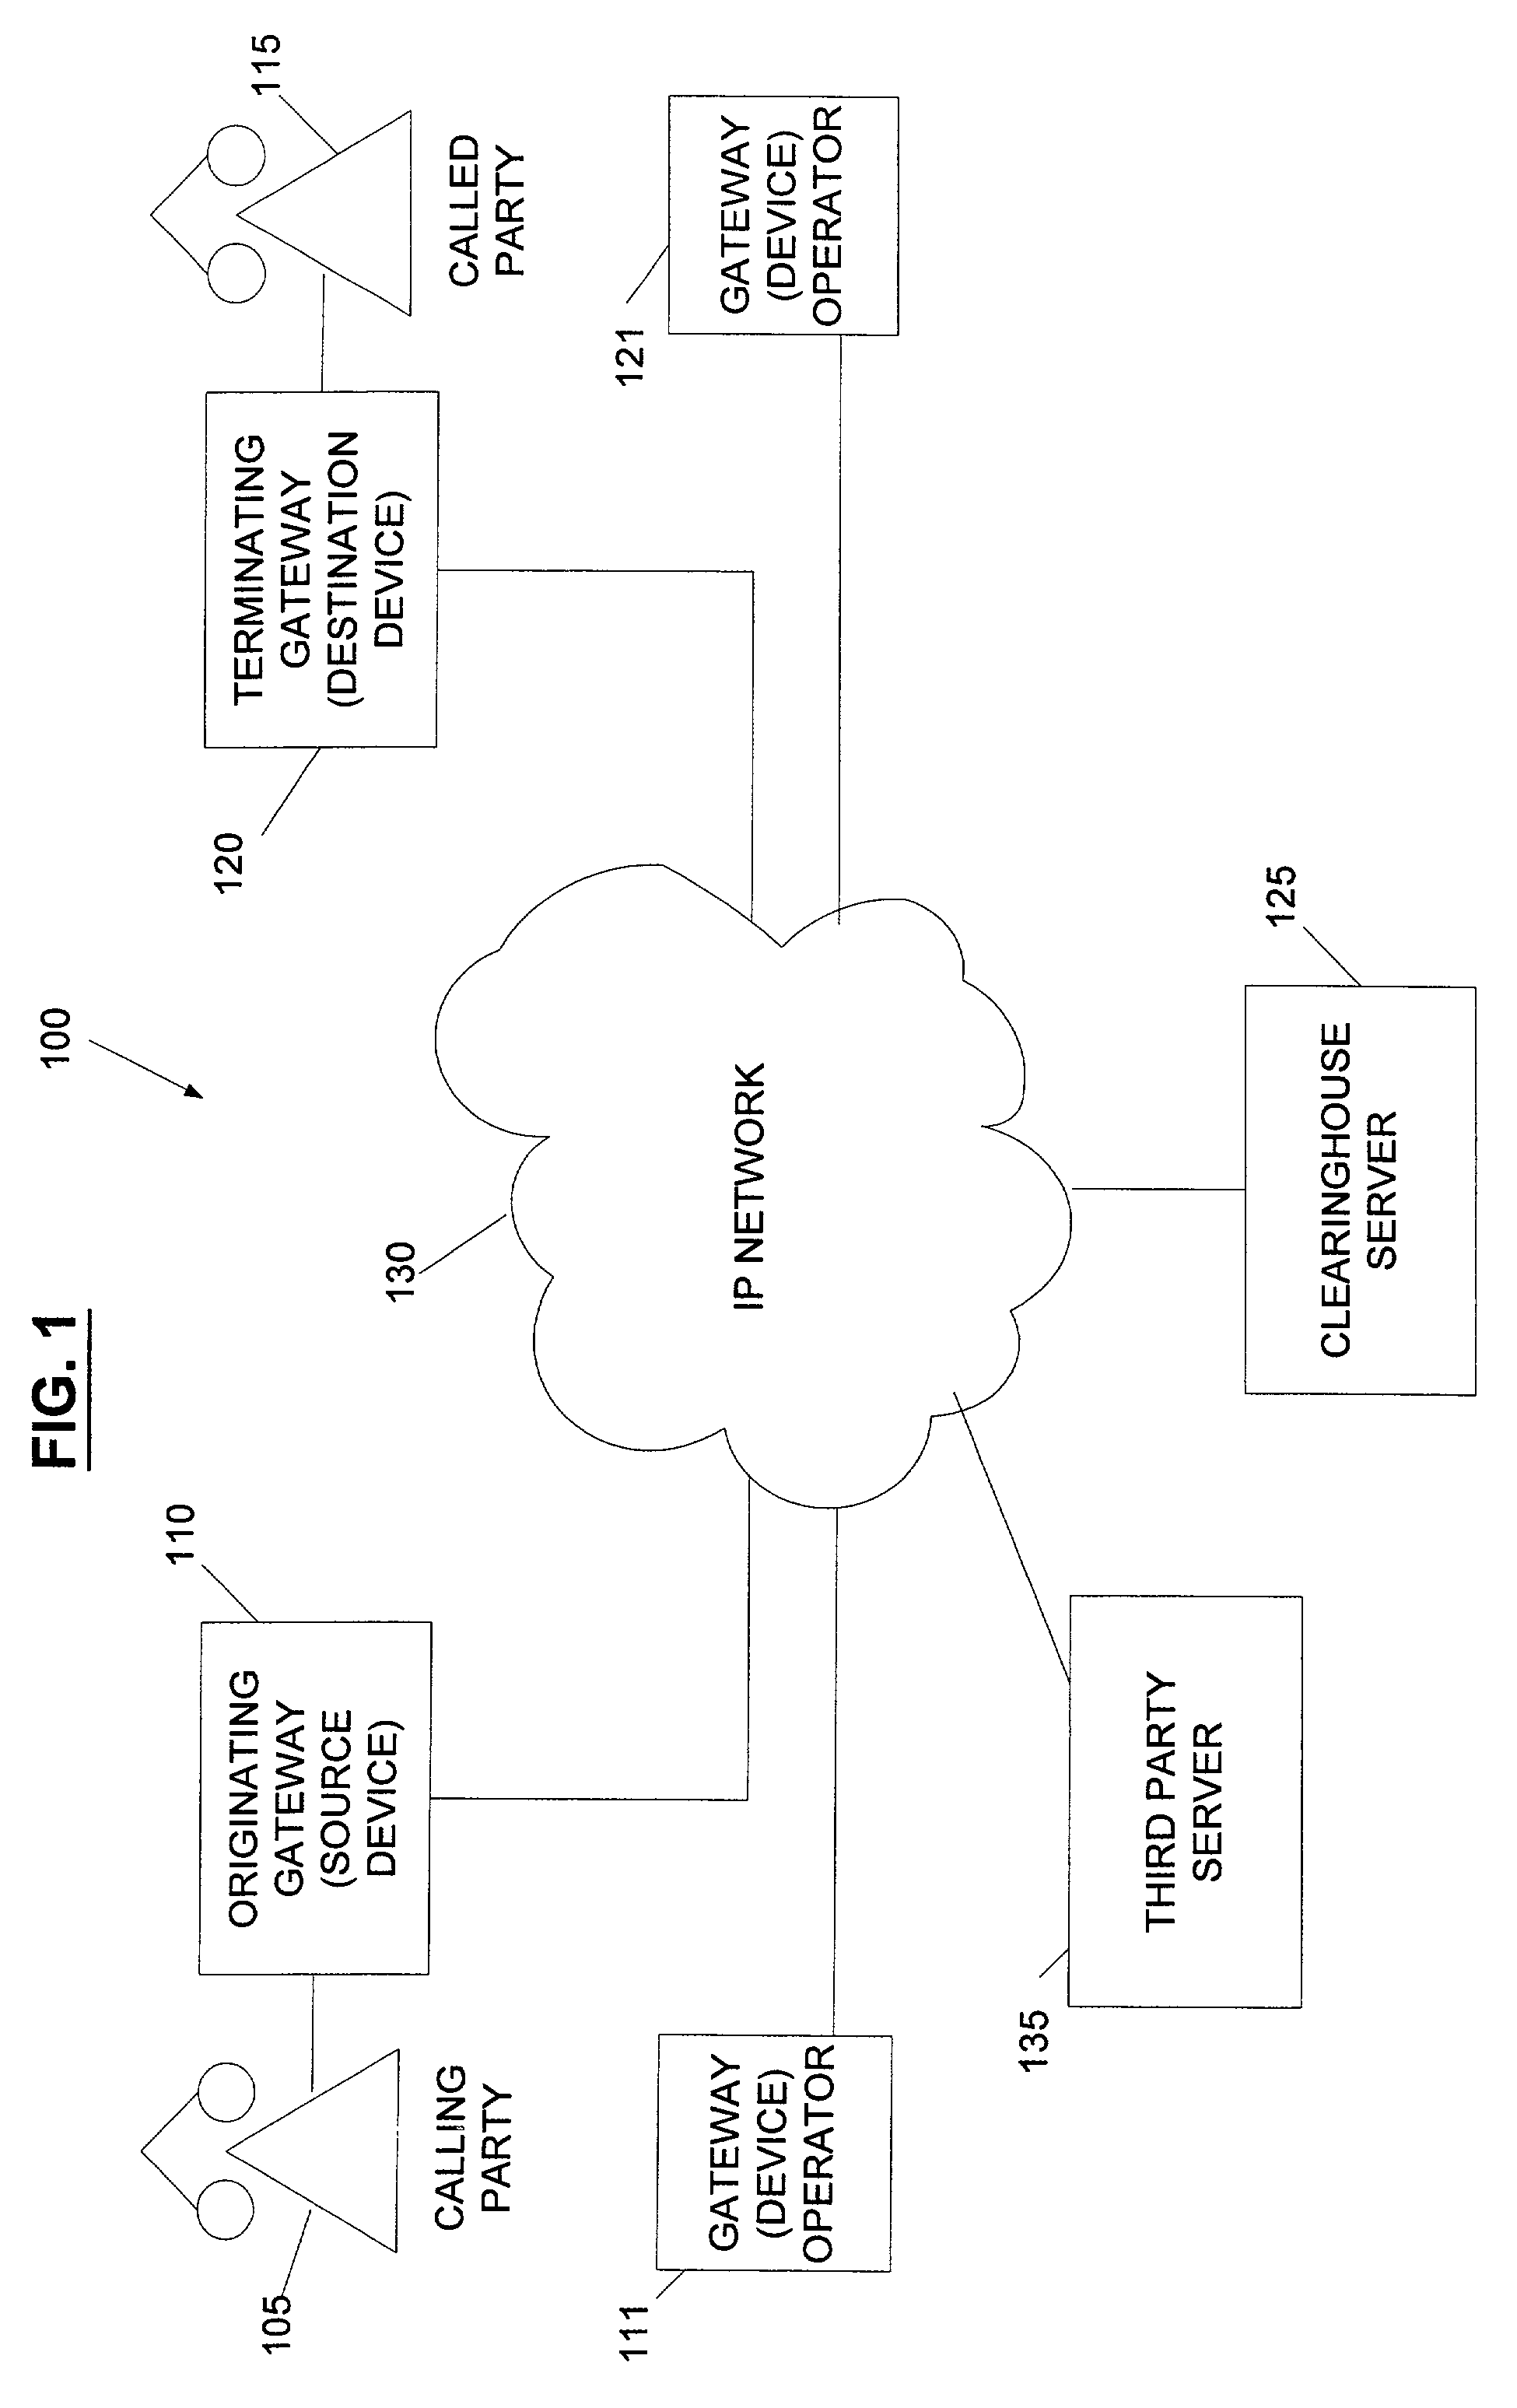 System and method for the secure enrollment of devices with a clearinghouse server for internet telephony and multimedia communications